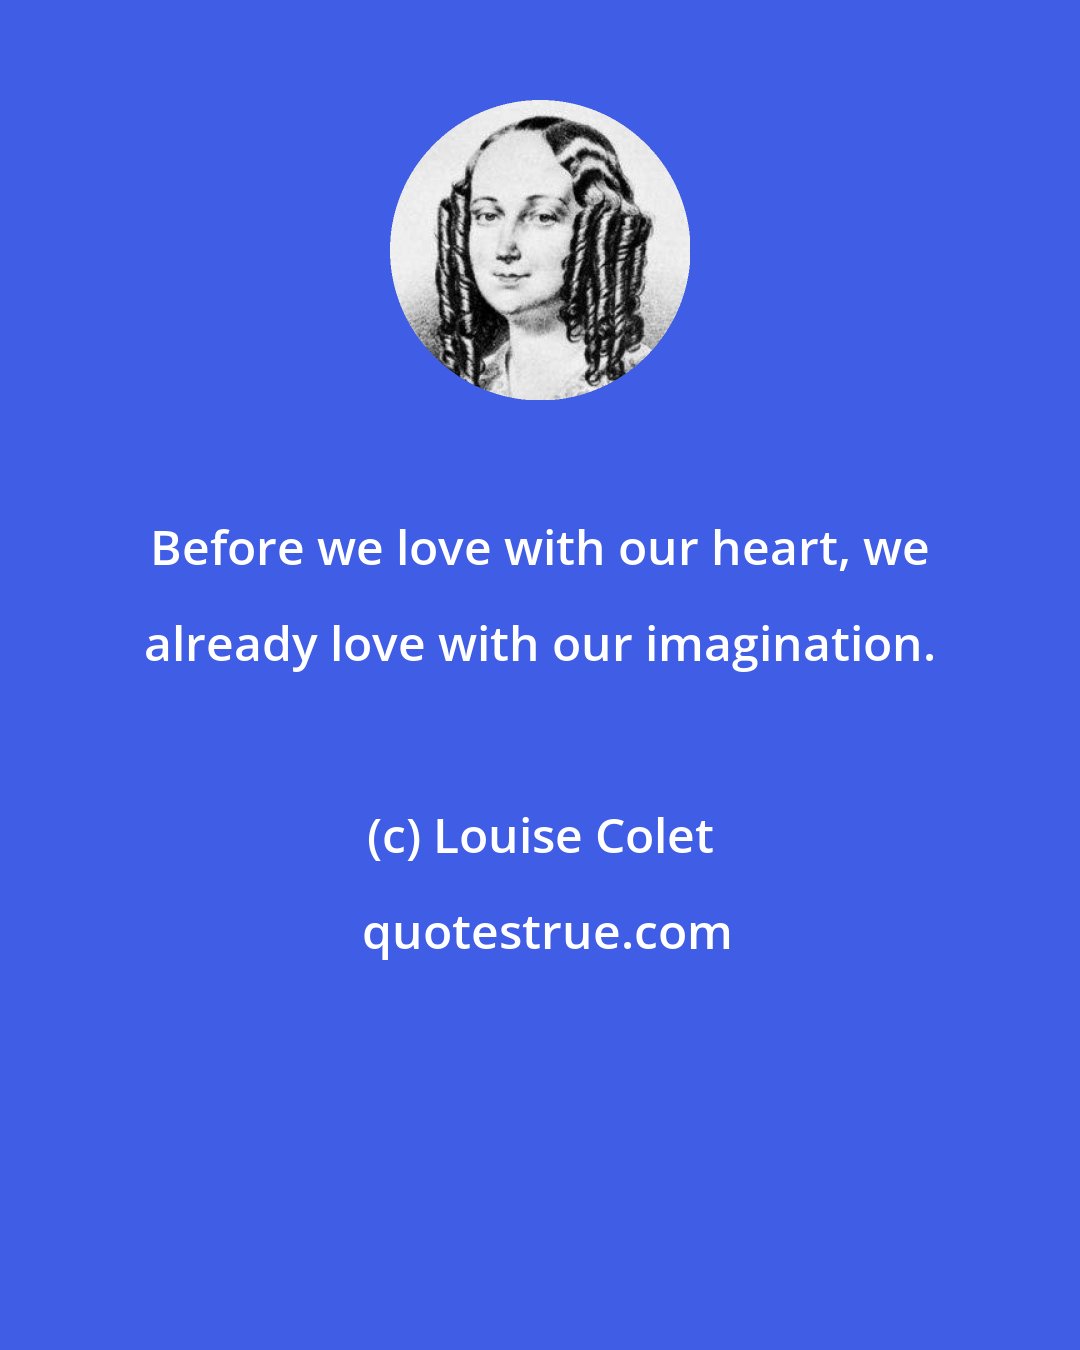 Louise Colet: Before we love with our heart, we already love with our imagination.